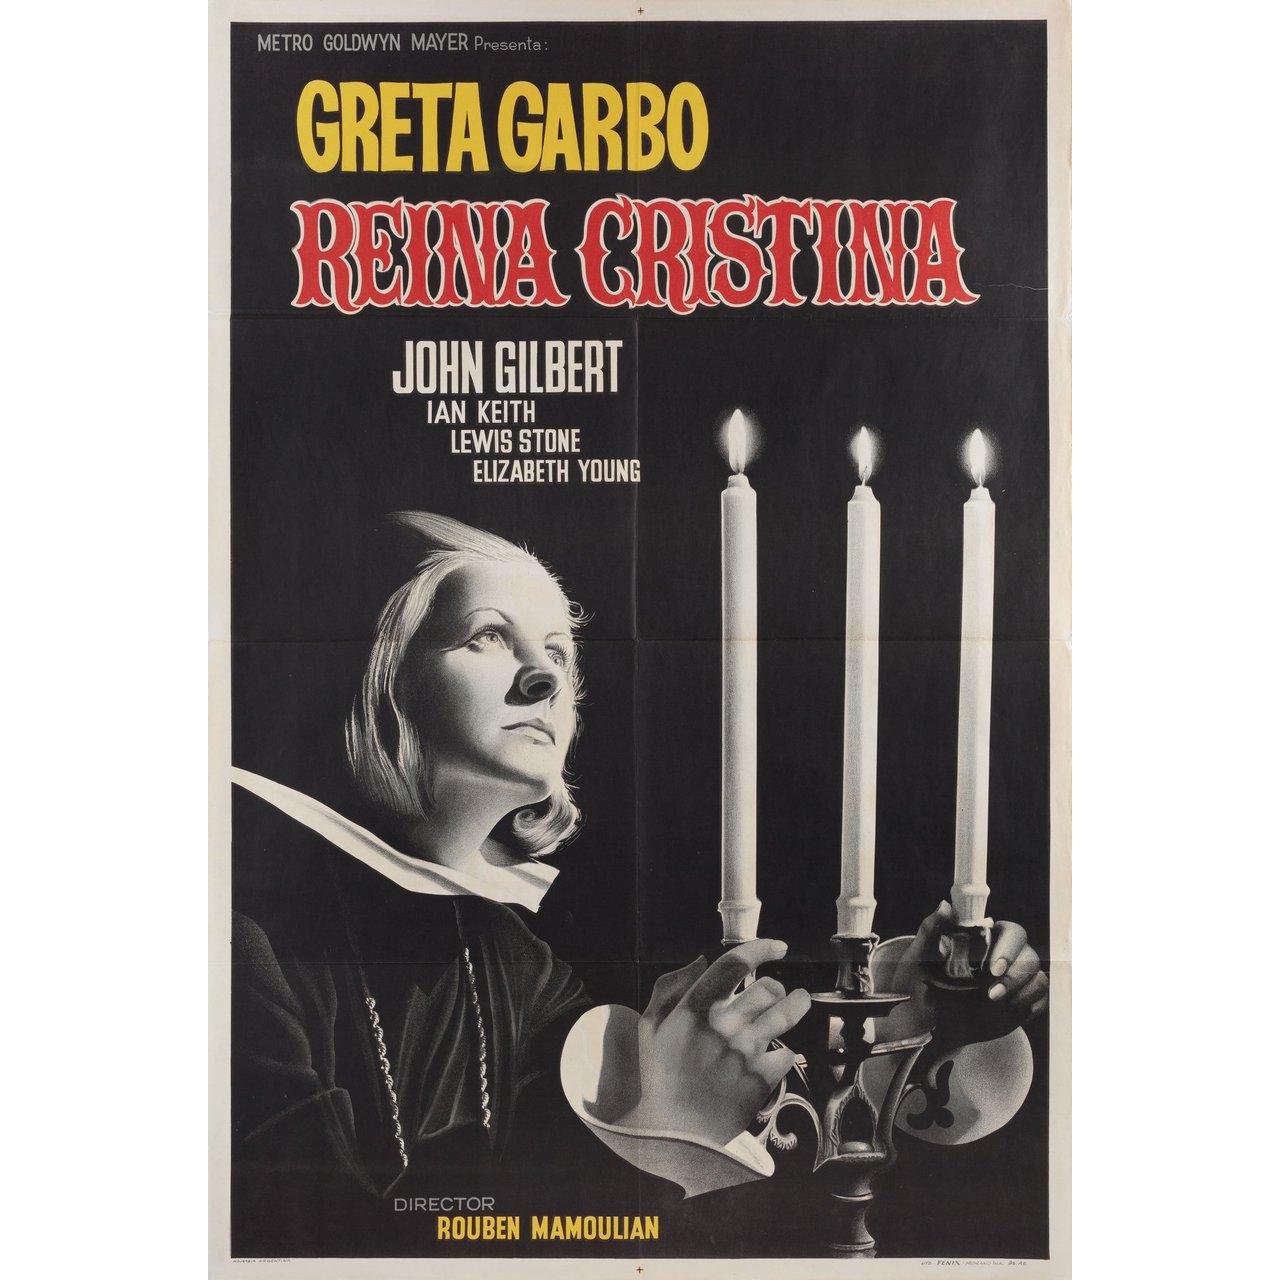 Original 1940s re-release Argentine poster for the 1933 film Queen Christina directed by Rouben Mamoulian with Greta Garbo / John Gilbert / Ian Keith / Lewis Stone. Very Good-Fine condition, folded. Many original posters were issued folded or were